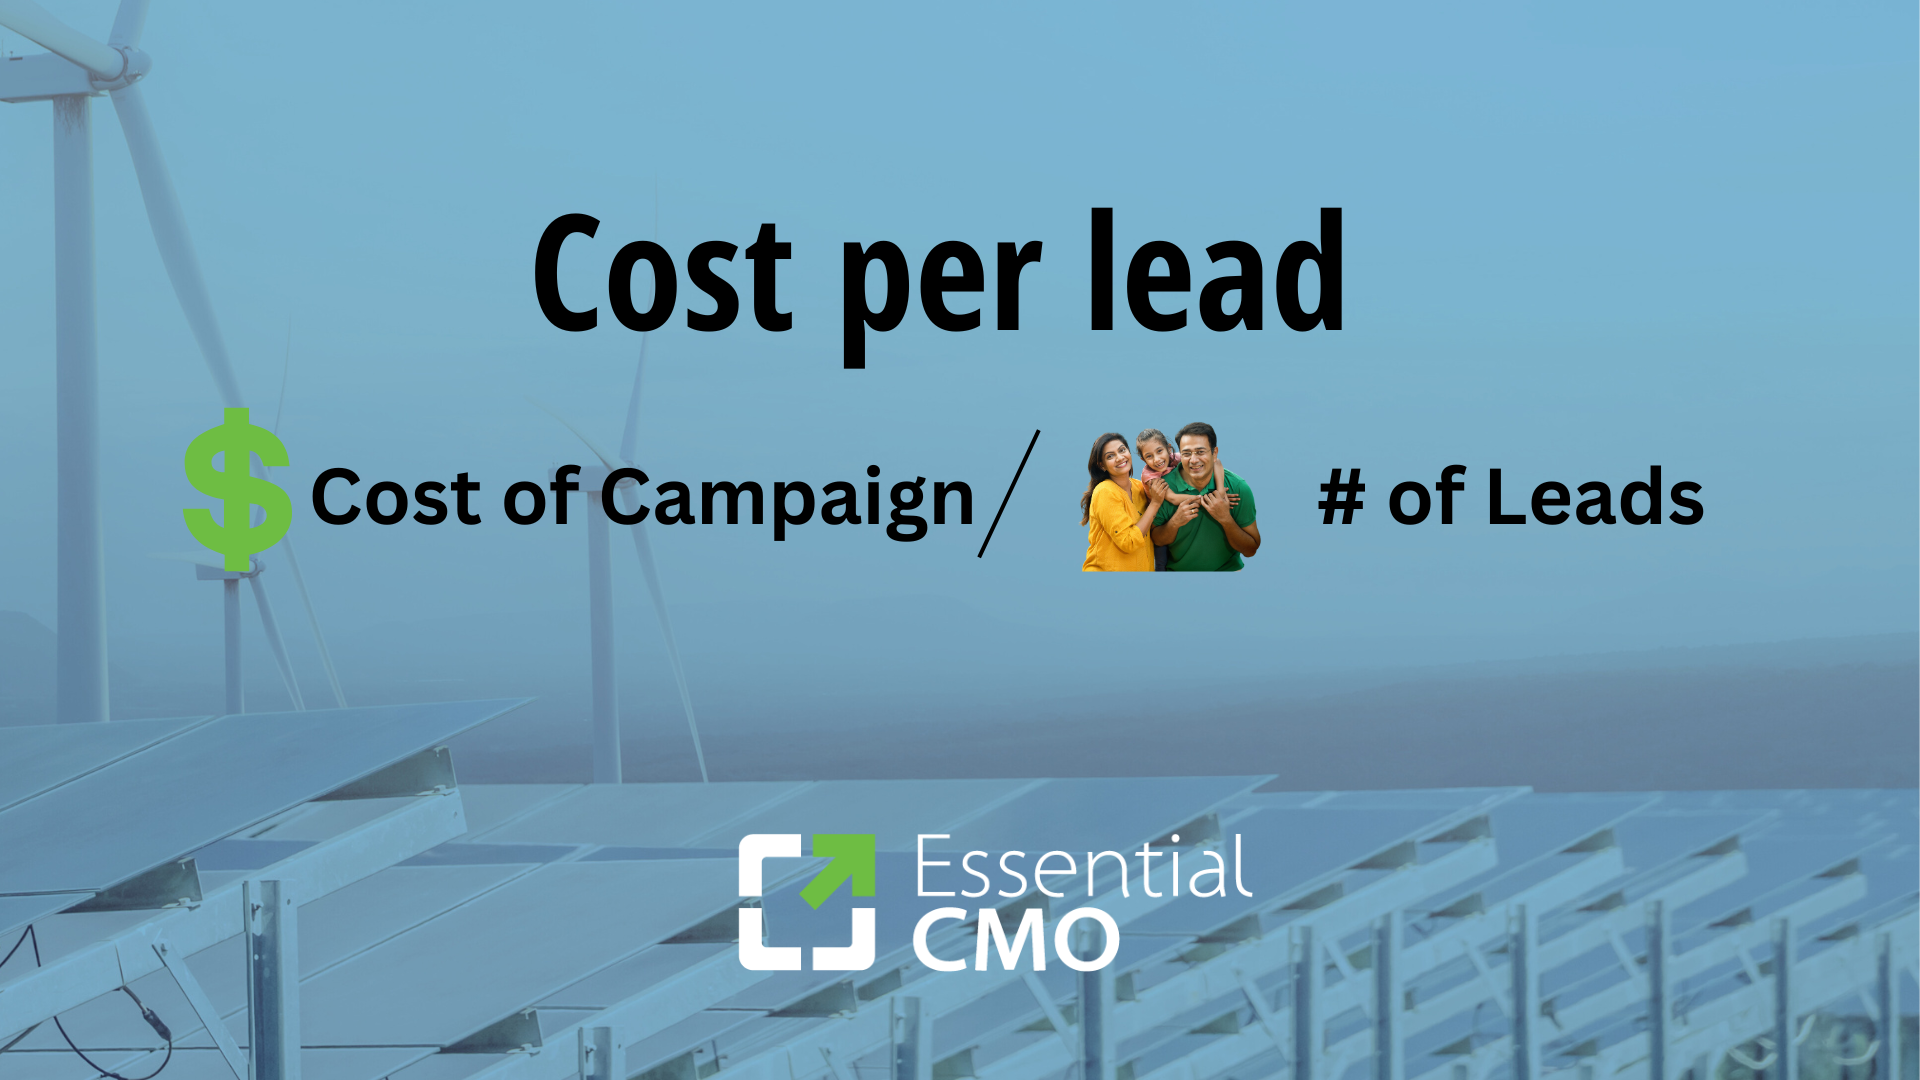 Marketing performance indicators need to include Cost per lead and it is different for each marketing channel.